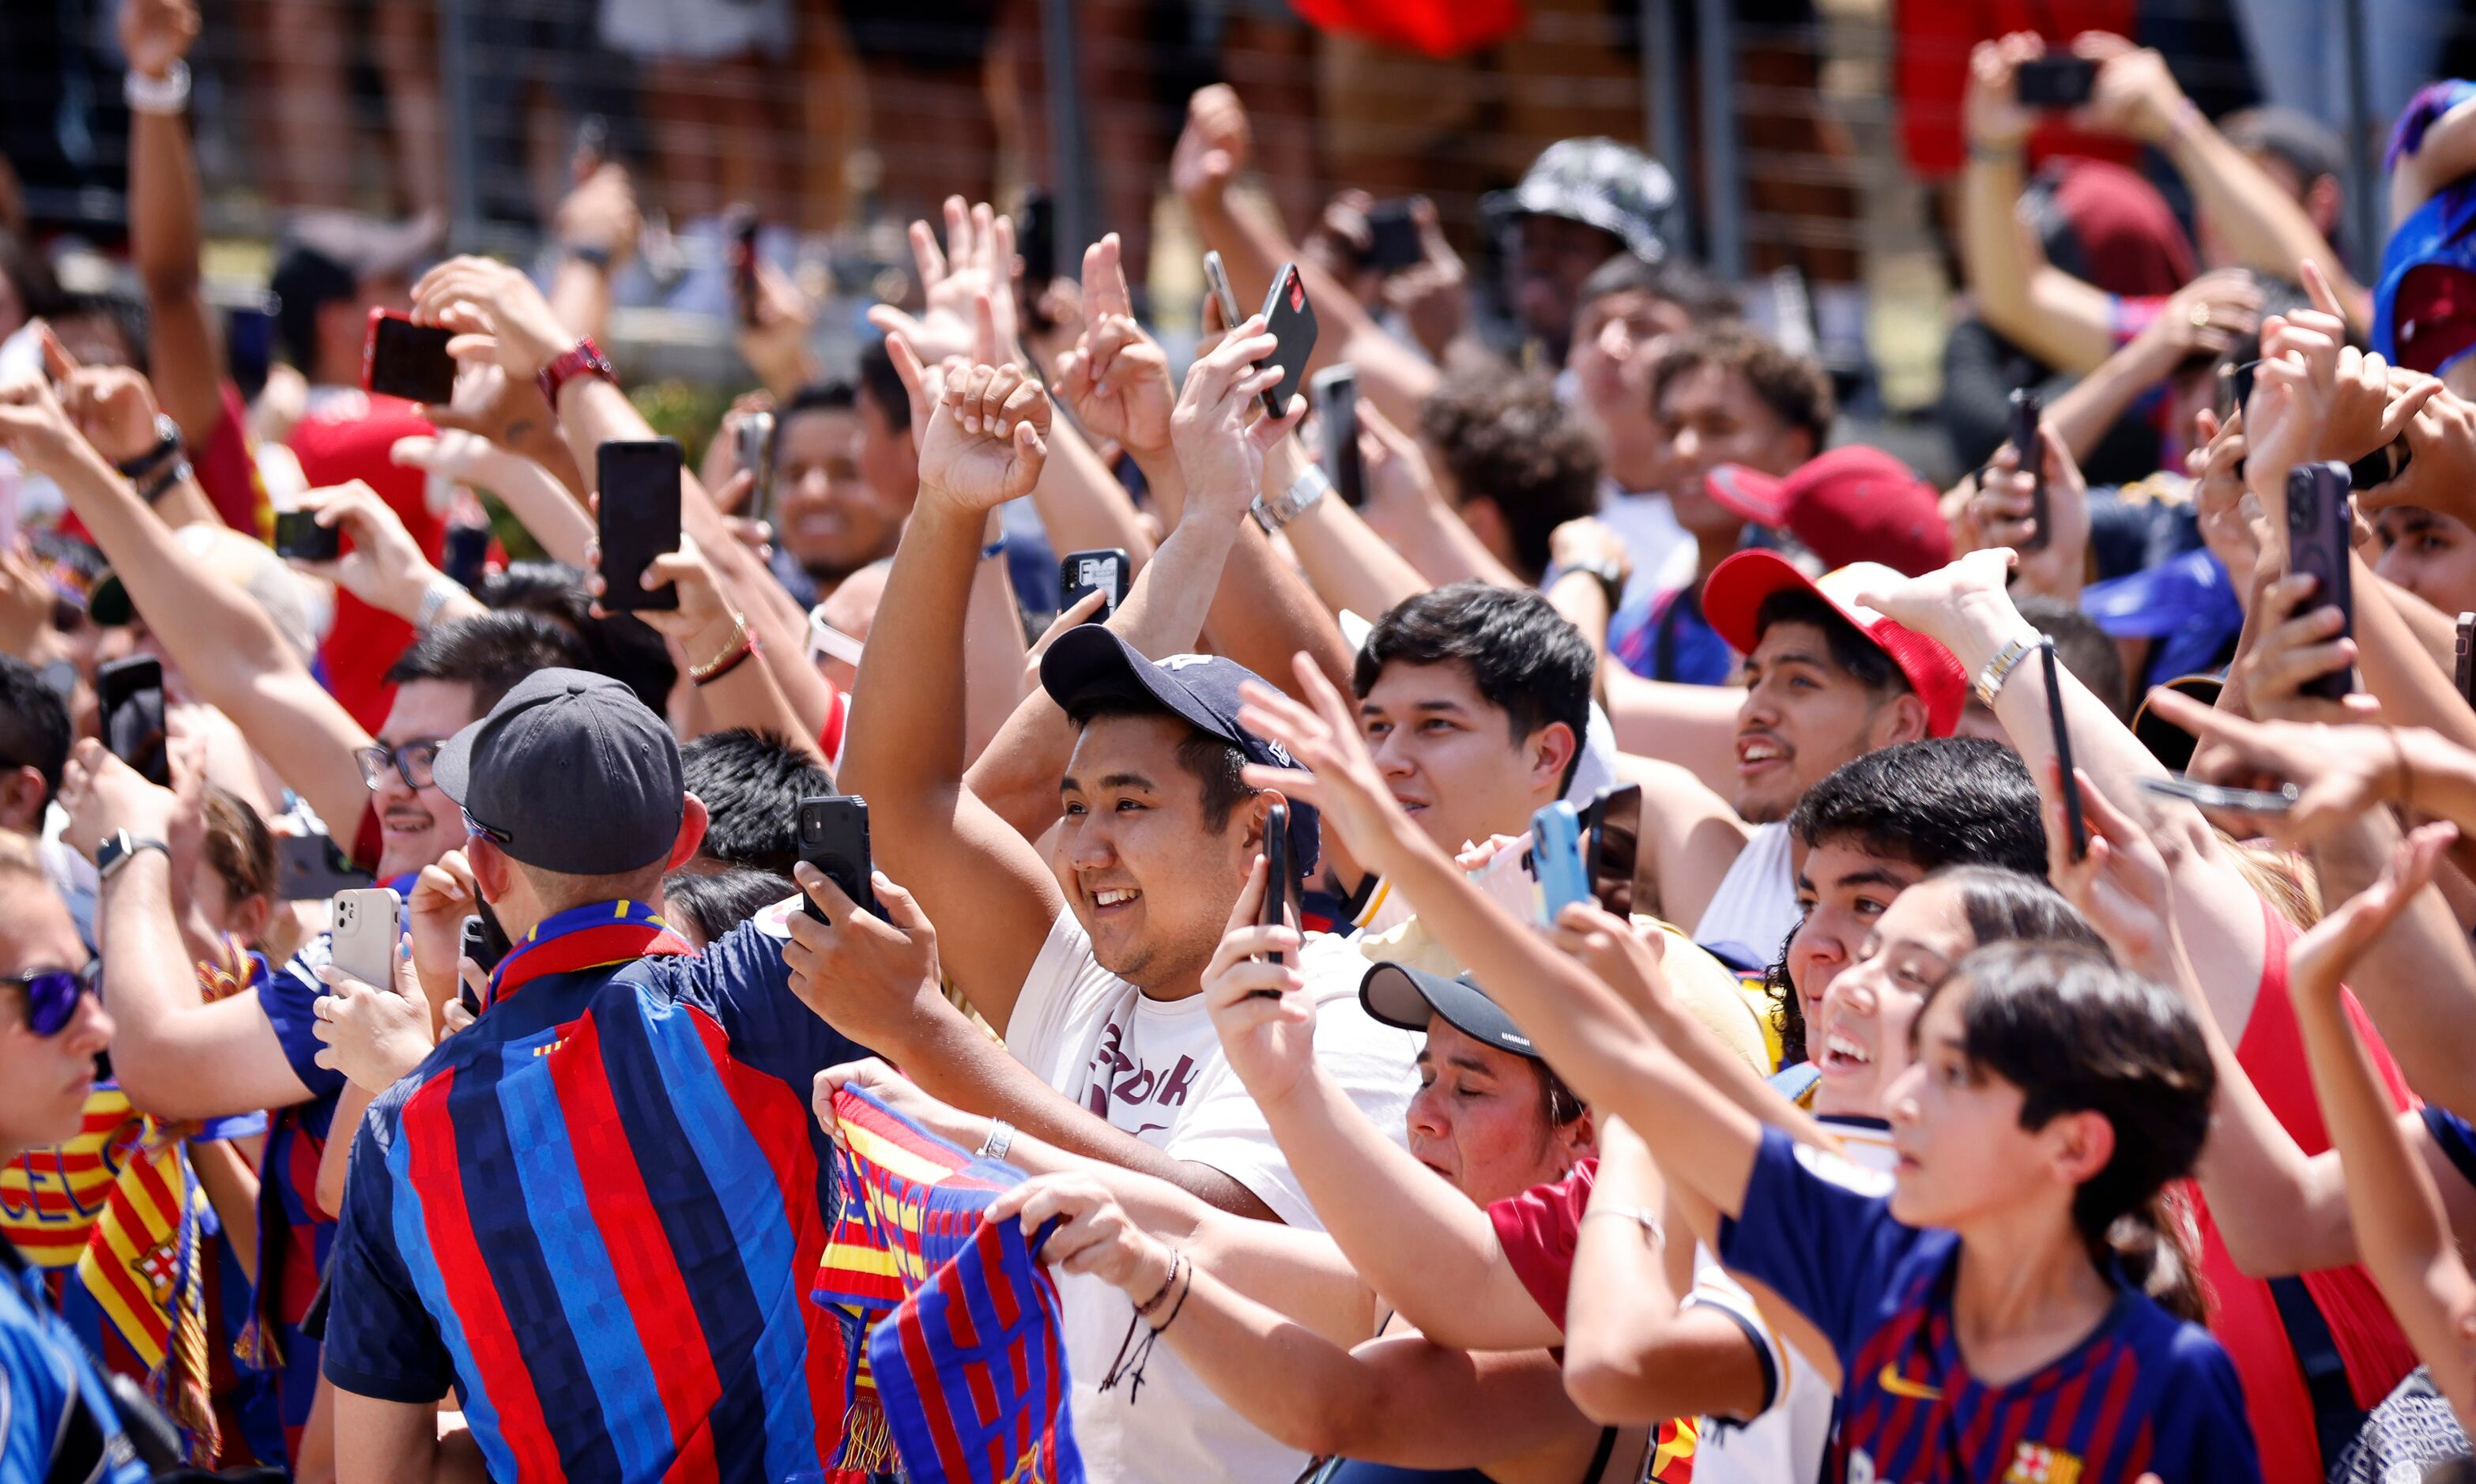 El Clásico in Arlington provided rare opportunity for Real Madrid, Barcelona  fans in US